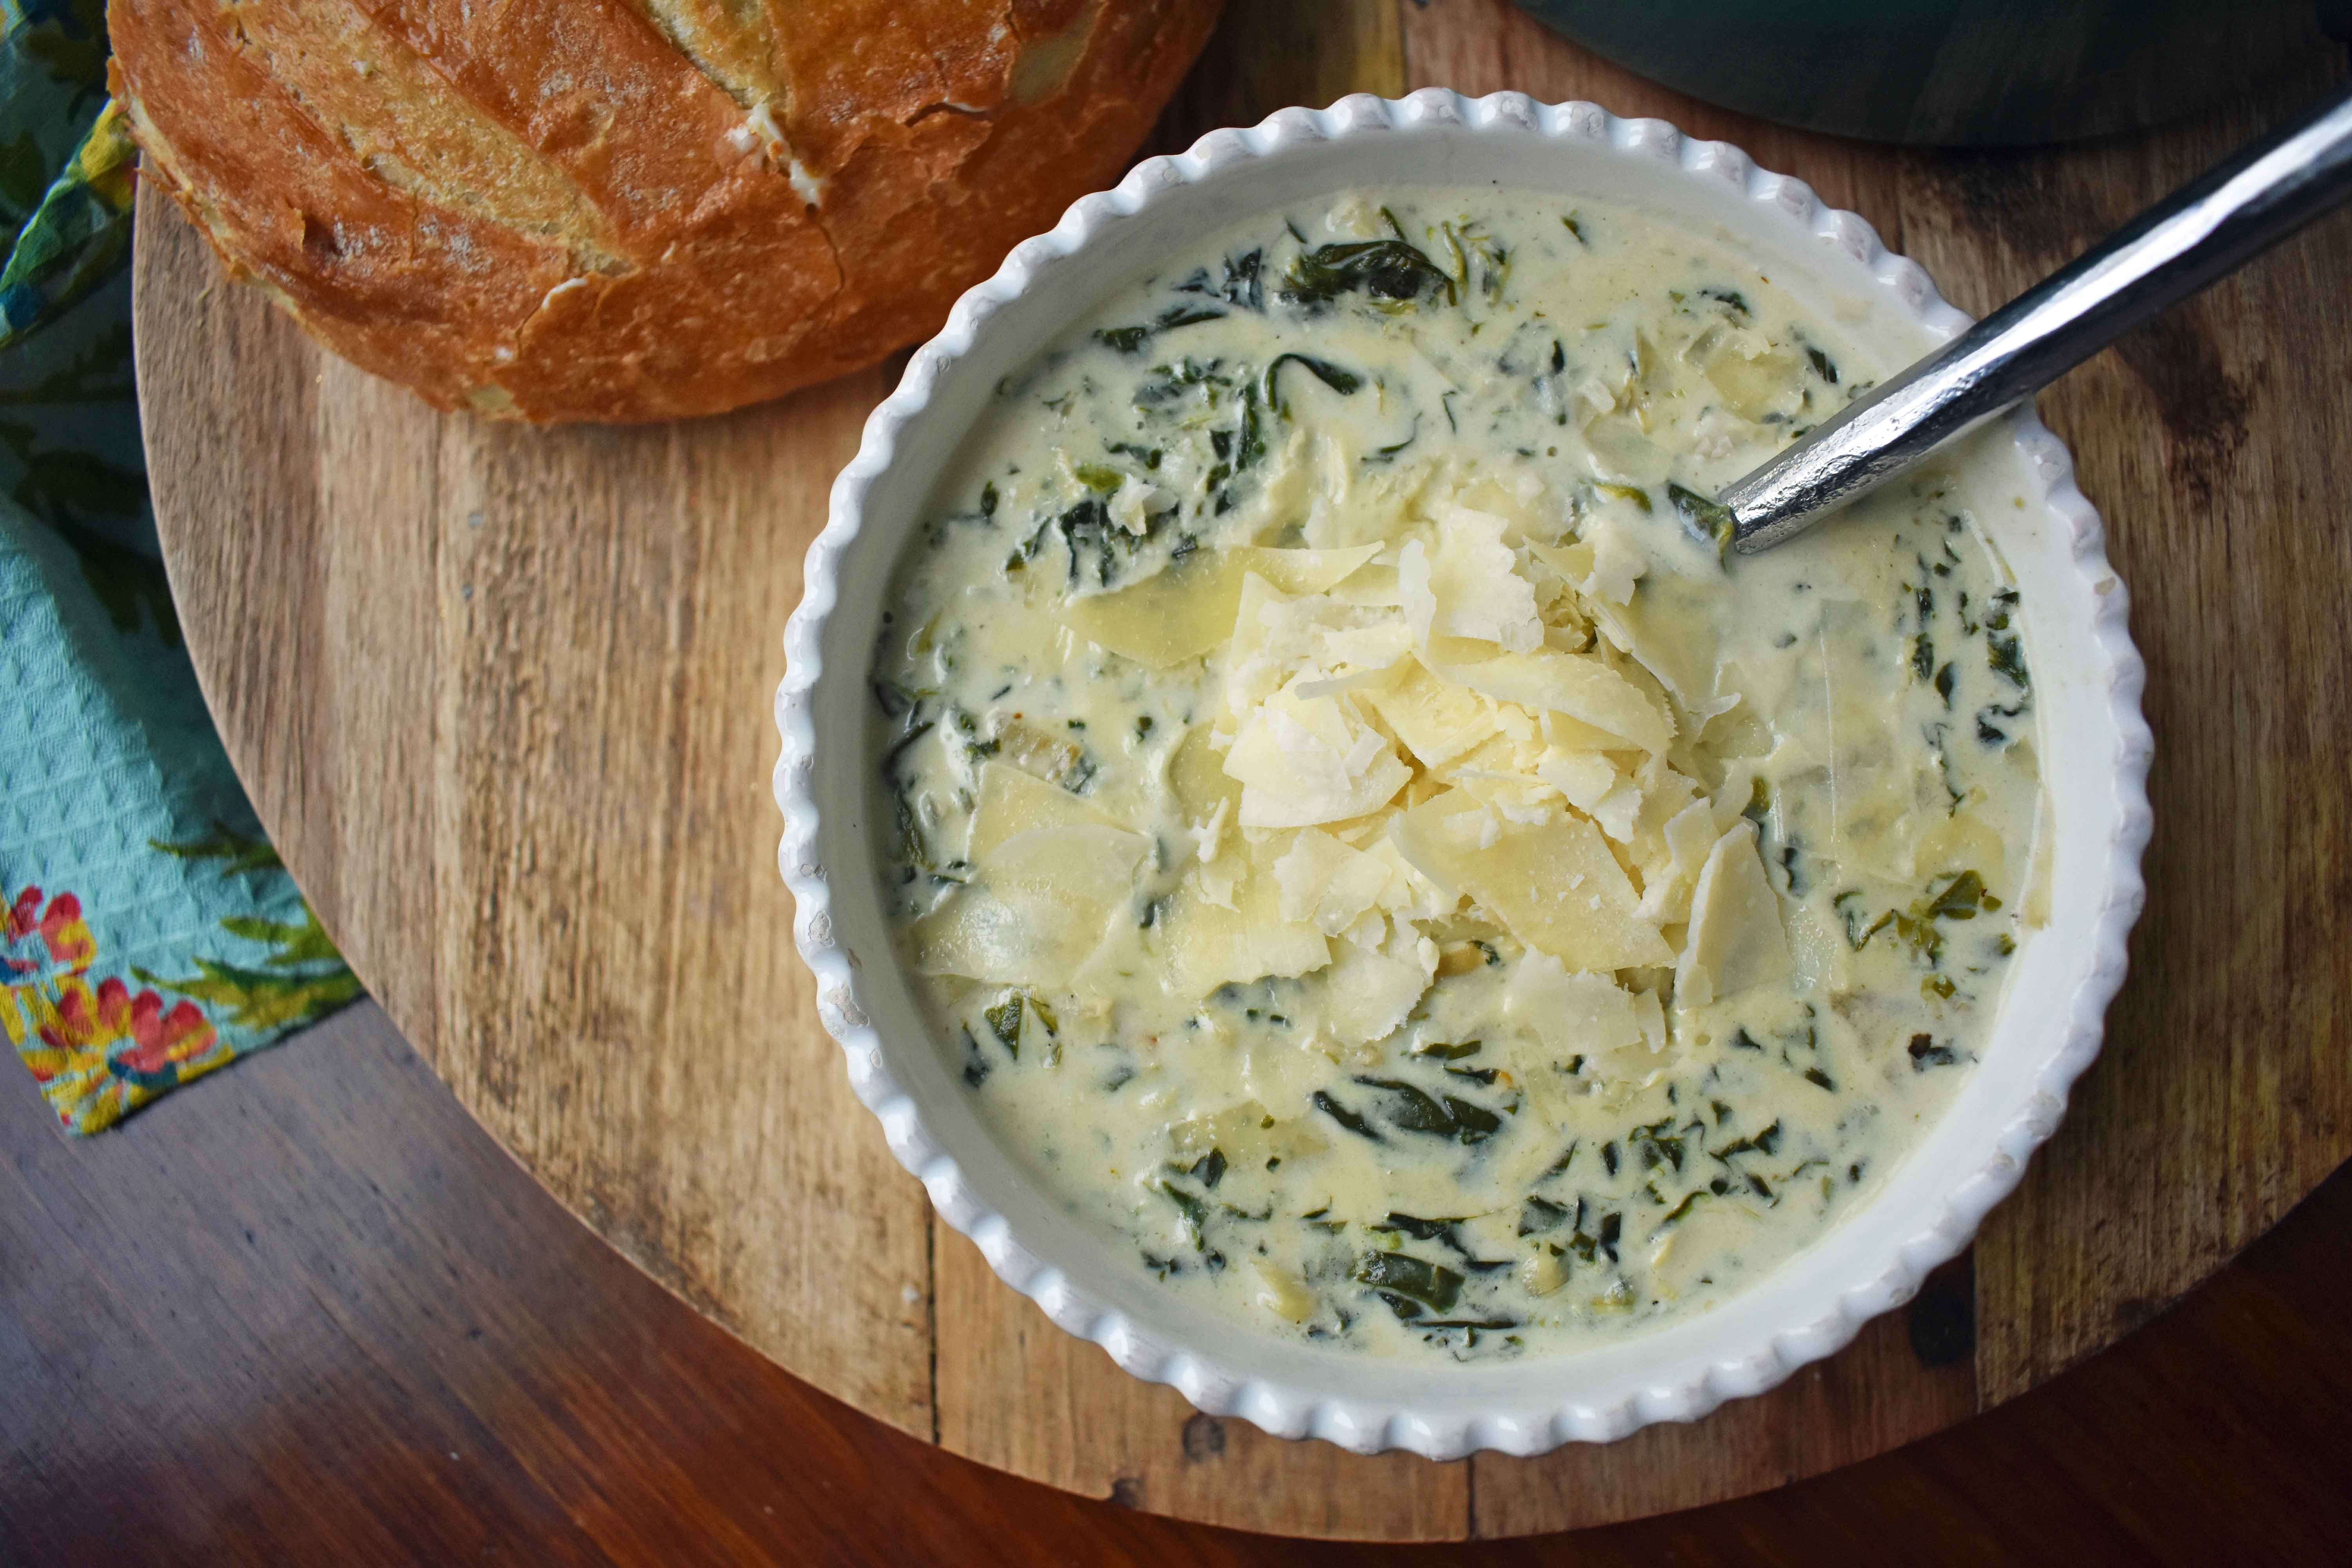 Creamy Spinach Artichoke Soup by Modern Honey. Rich and creamy parmesan cheese cream soup with spinach and artichokes. Perfect soup for a cold winter's day. www.modernhoney.com